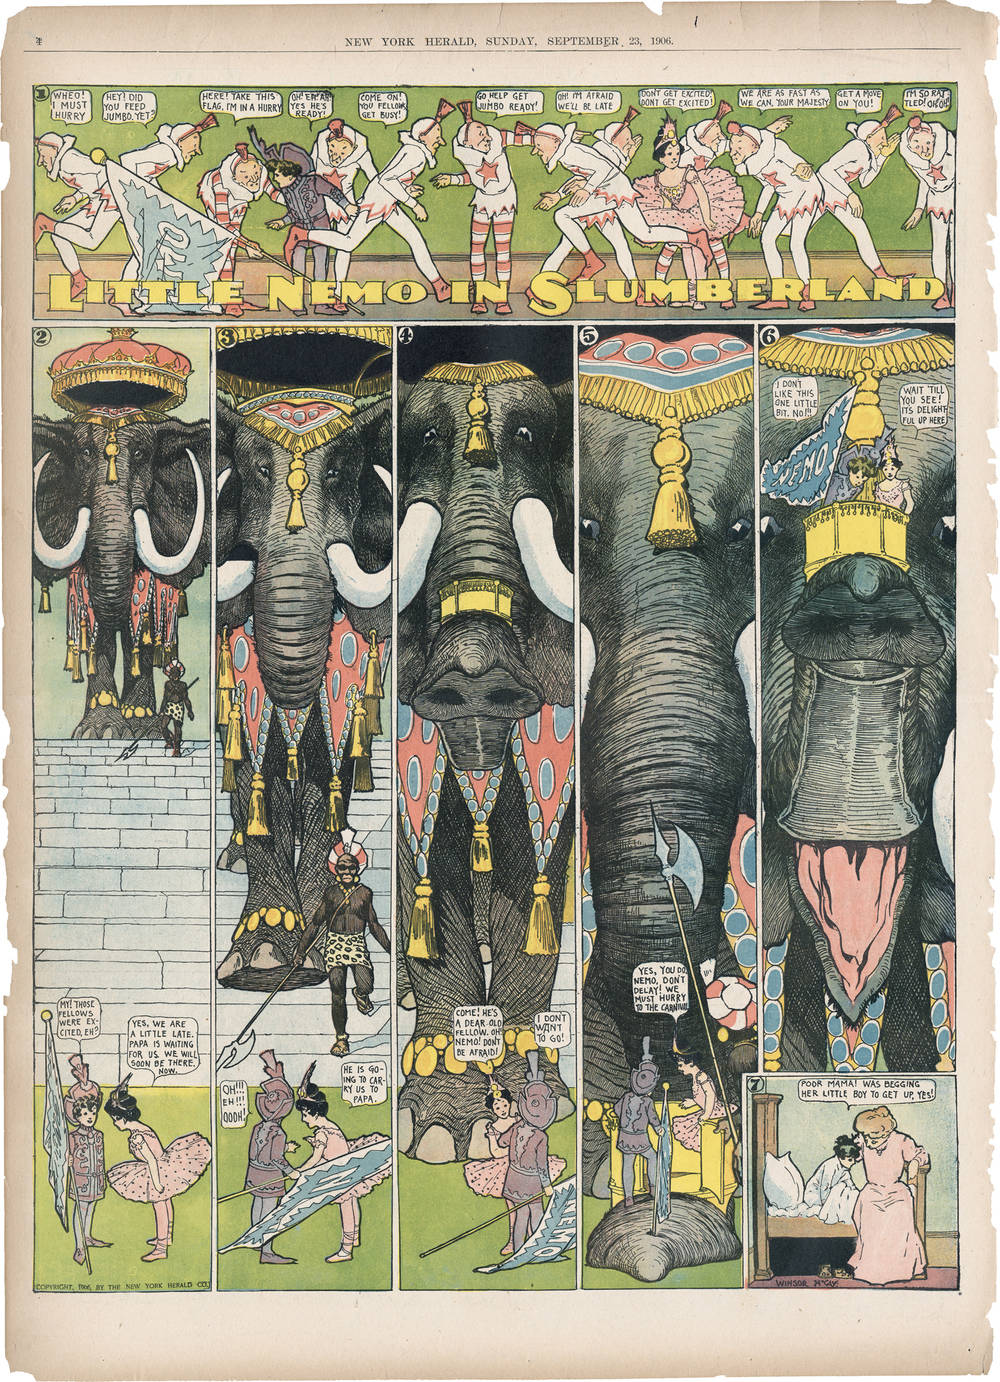 Little Nemo The Complete Comic Strips (1905) By Winsor